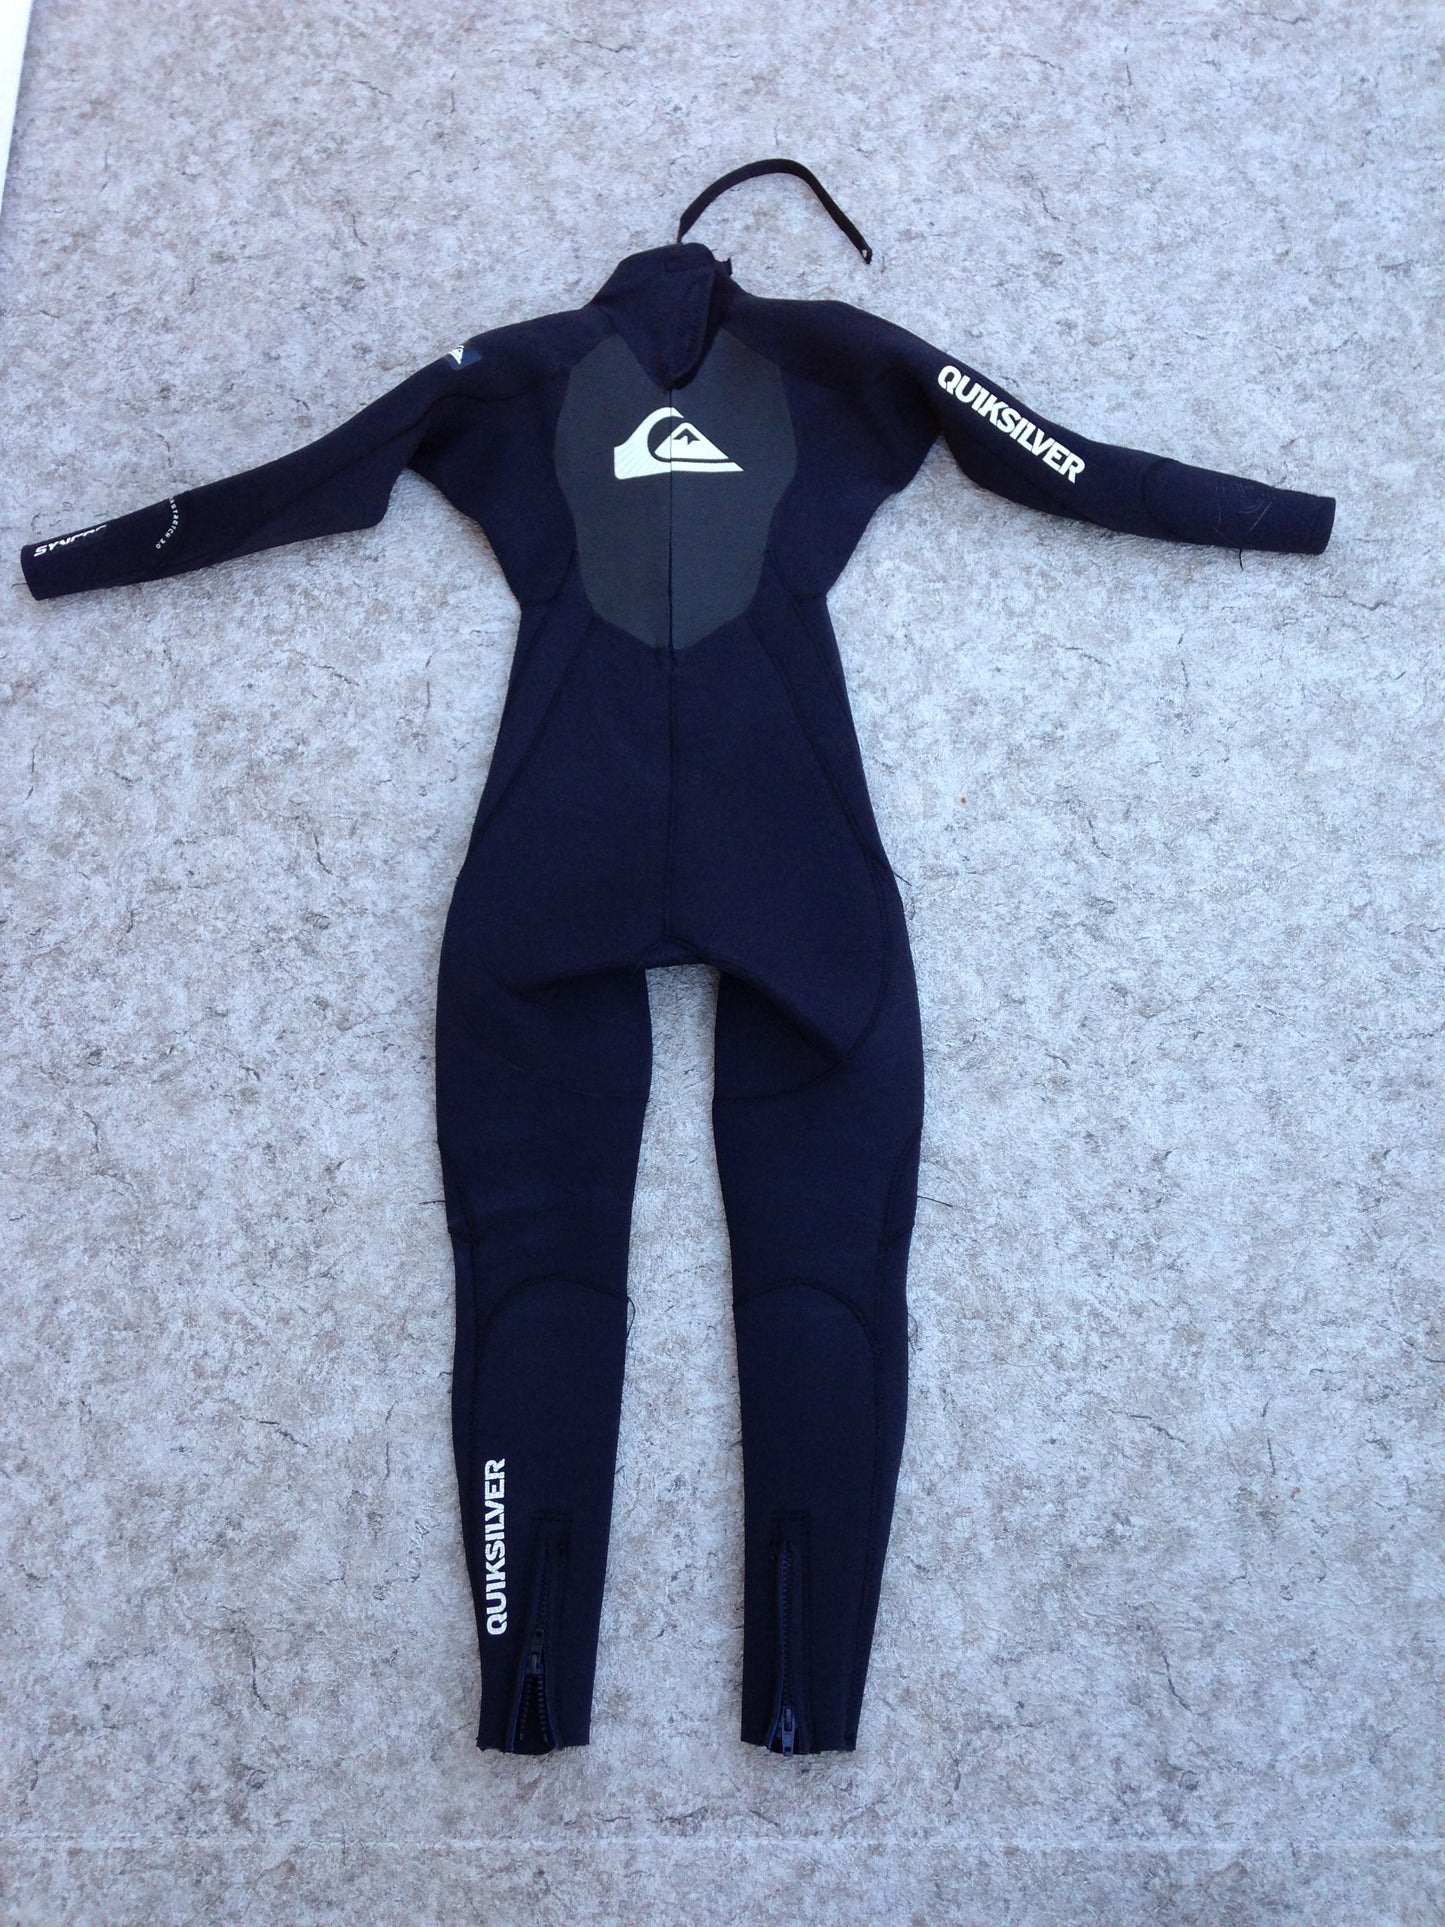 Wetsuit Child Size 10 Full Quick Silver Black 3.0 mm